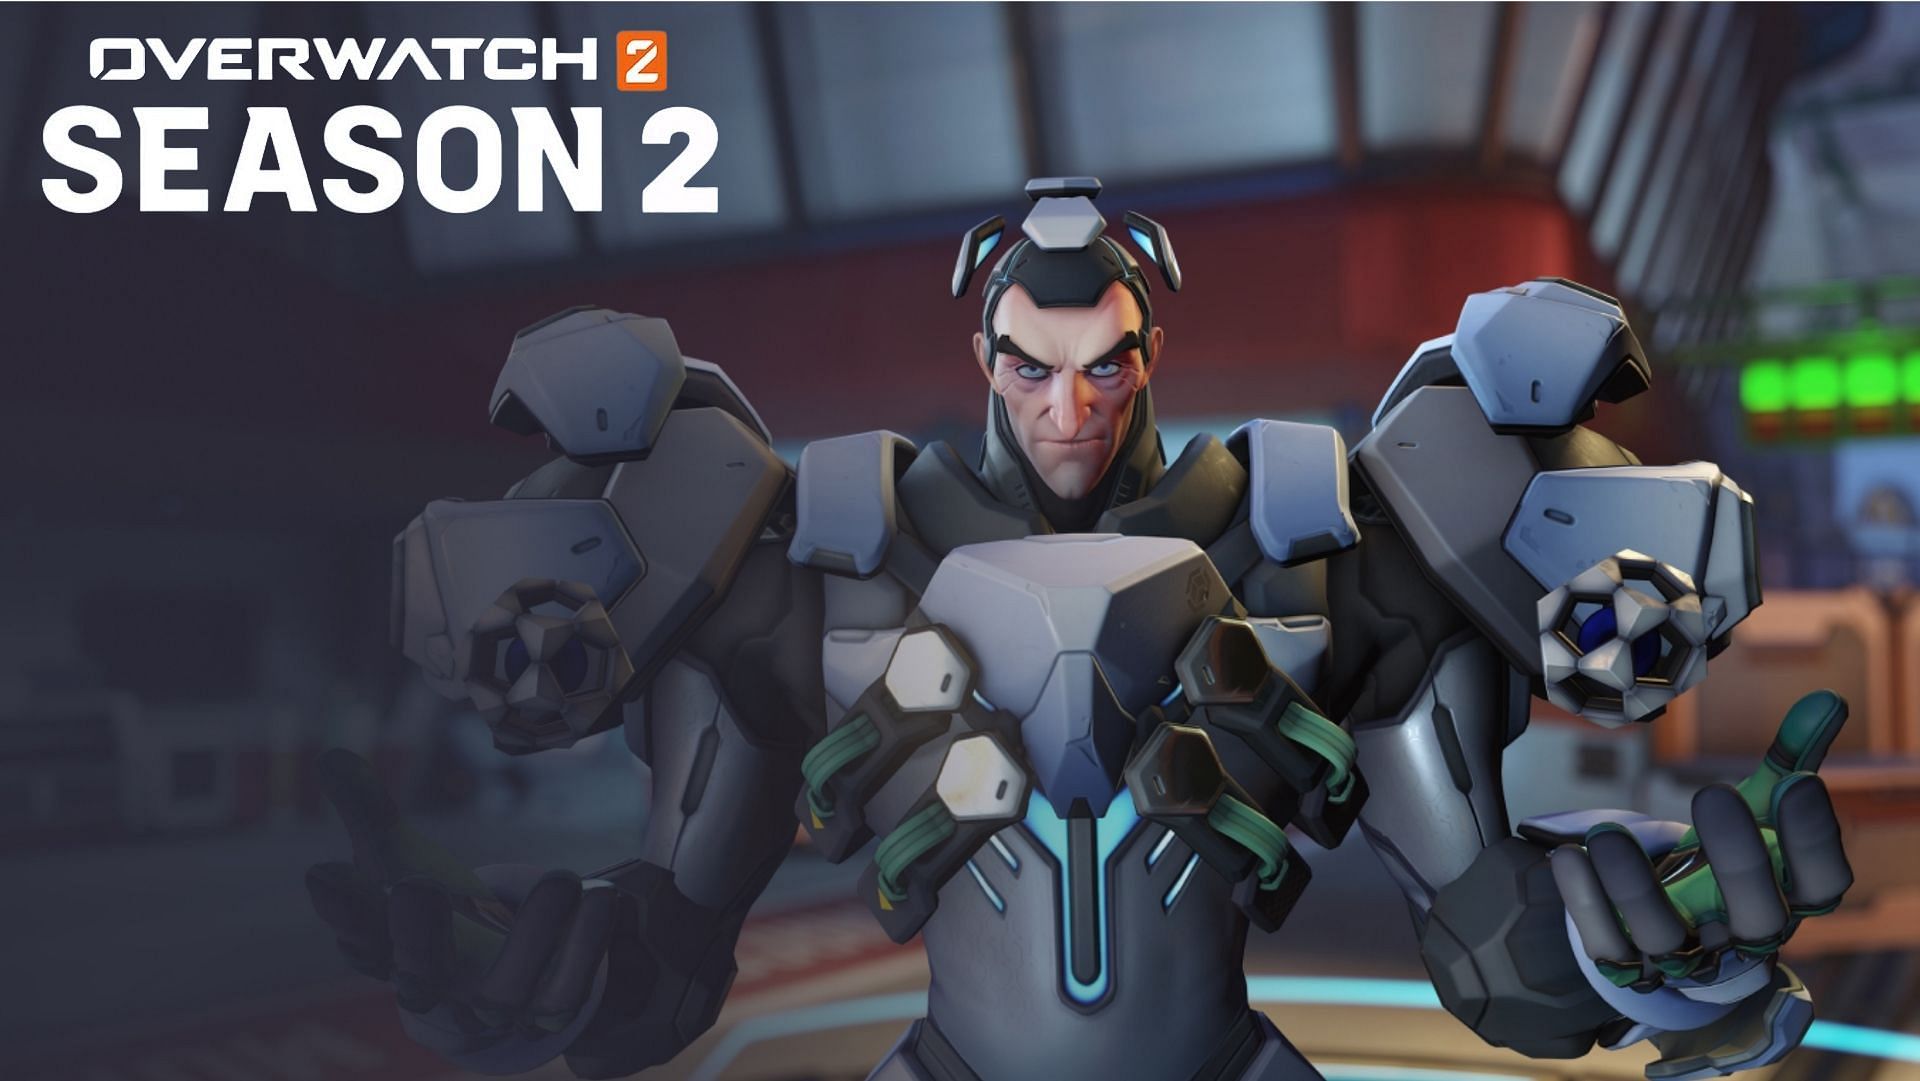 Sigma is an excellent Tank Hero in Overwatch 2 (Image via Blizzard Entertainment)